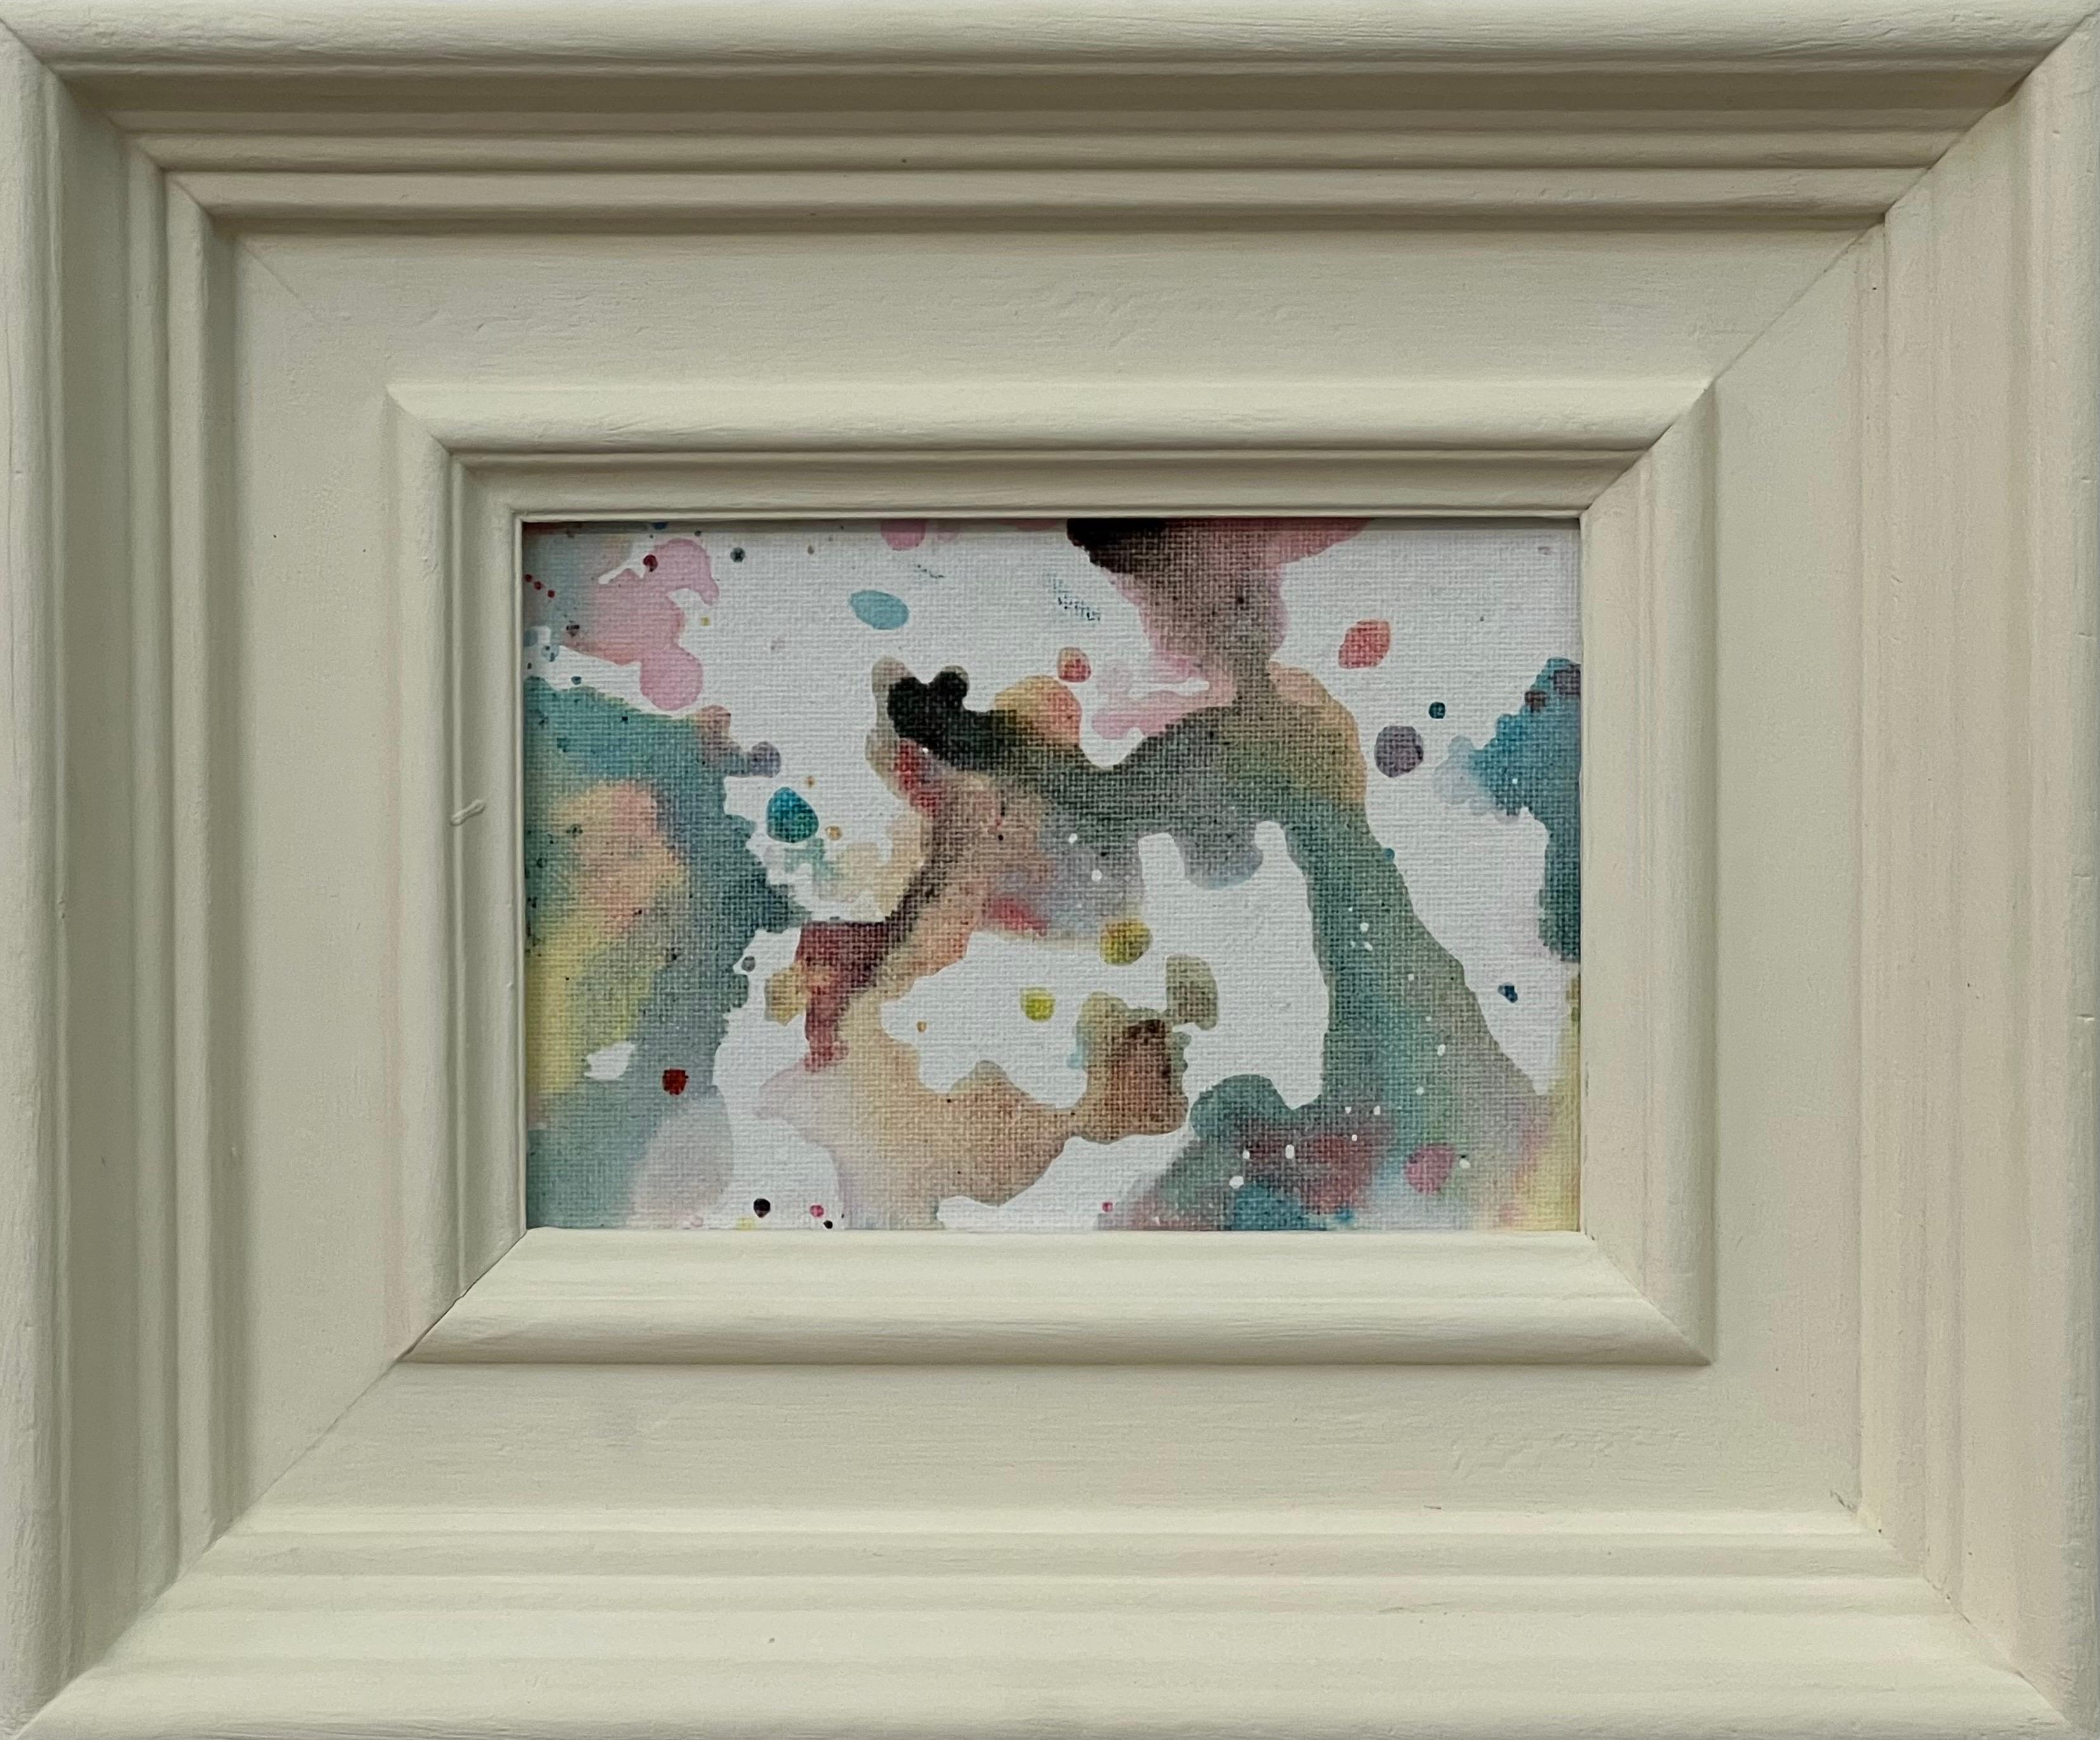 Miniature Abstract Study on White Canvas by Contemporary British Artist